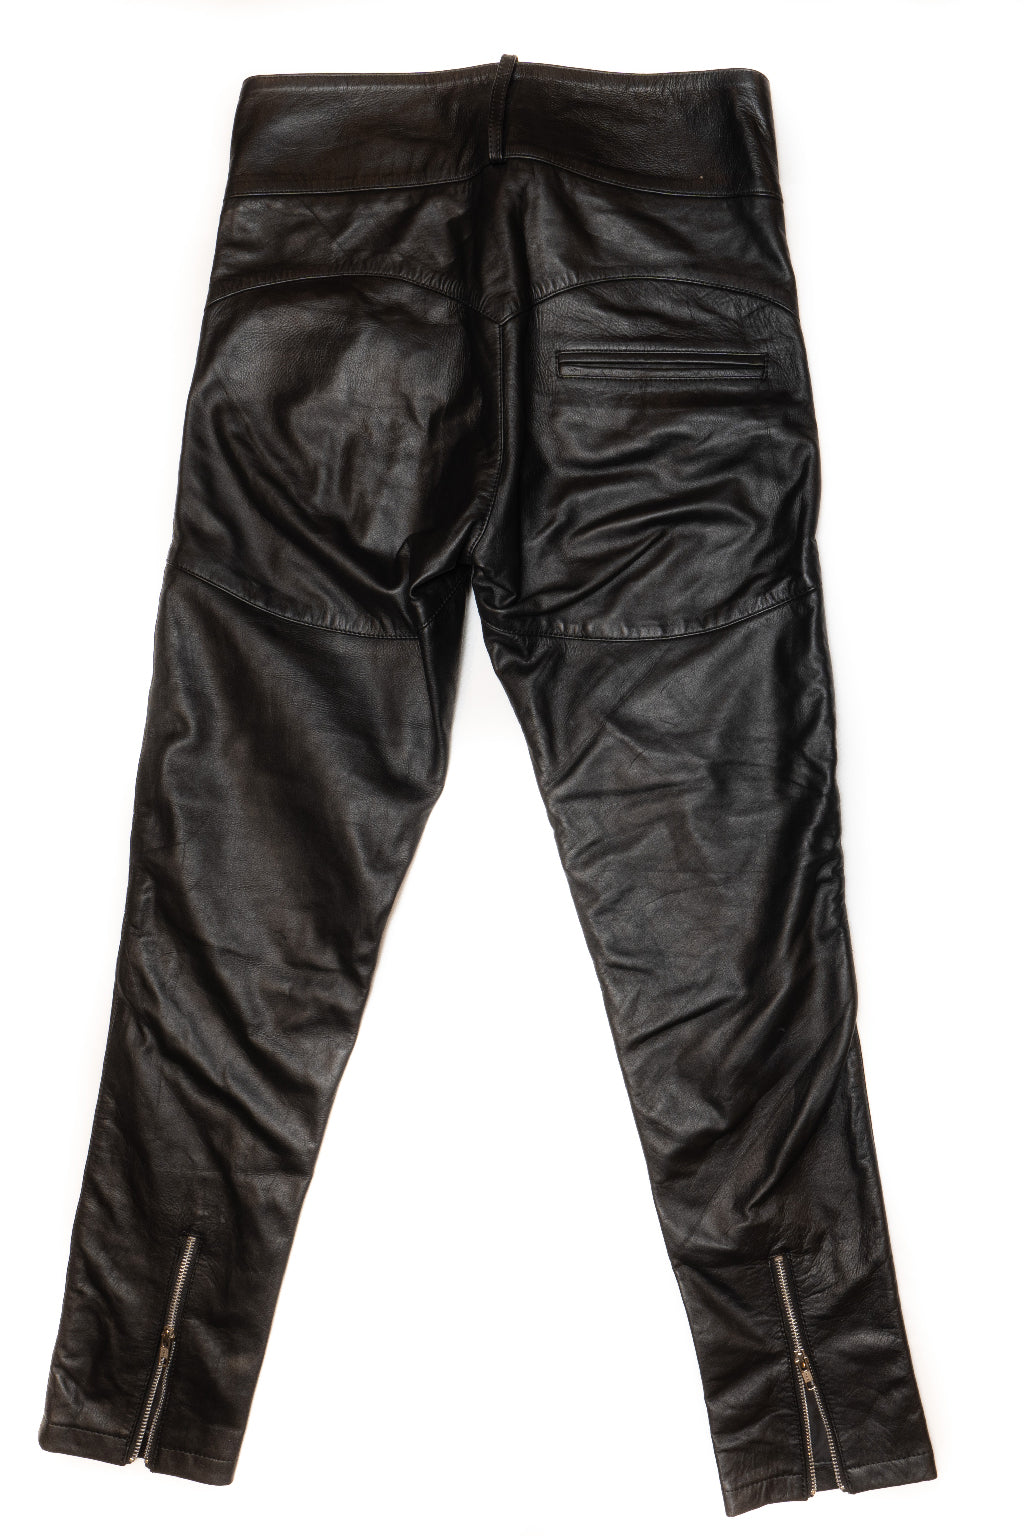 Women's Leather Pants - Style 1